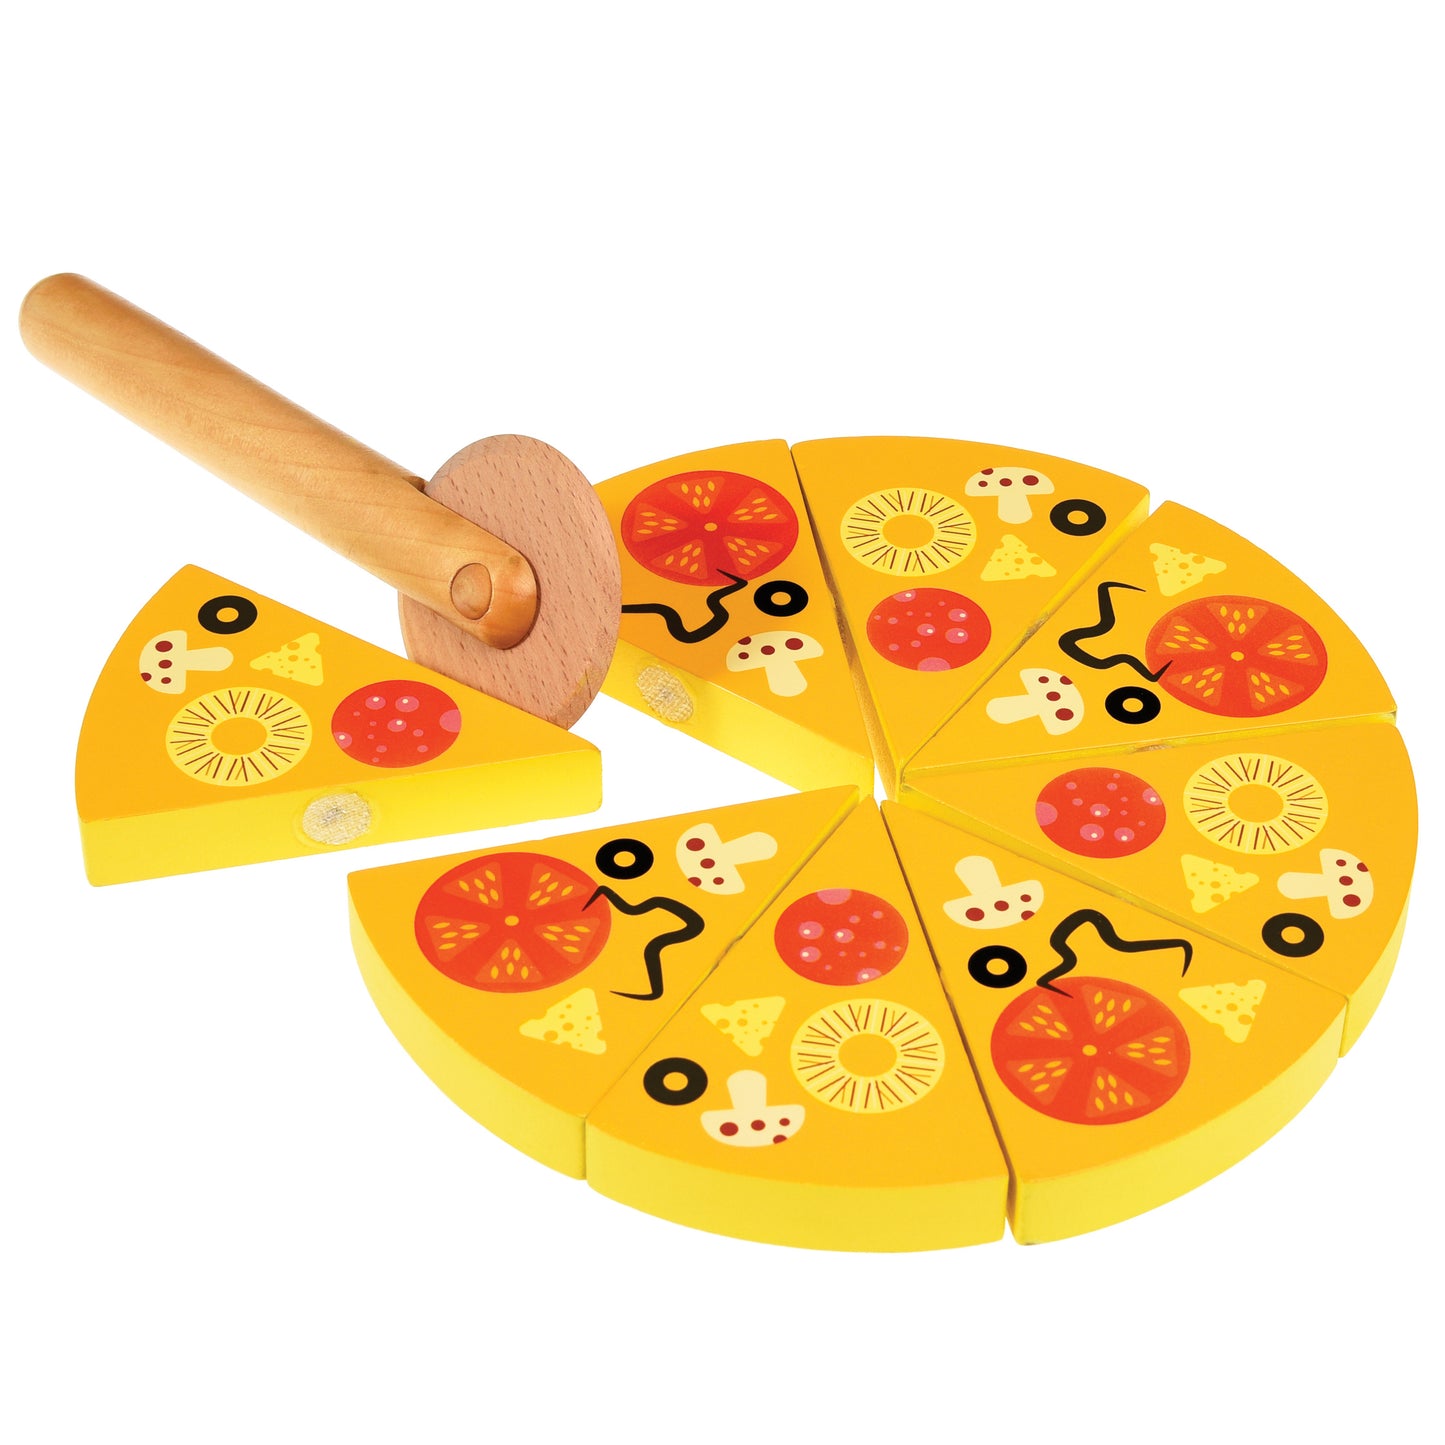 Wooden Toy Pizza in a Box